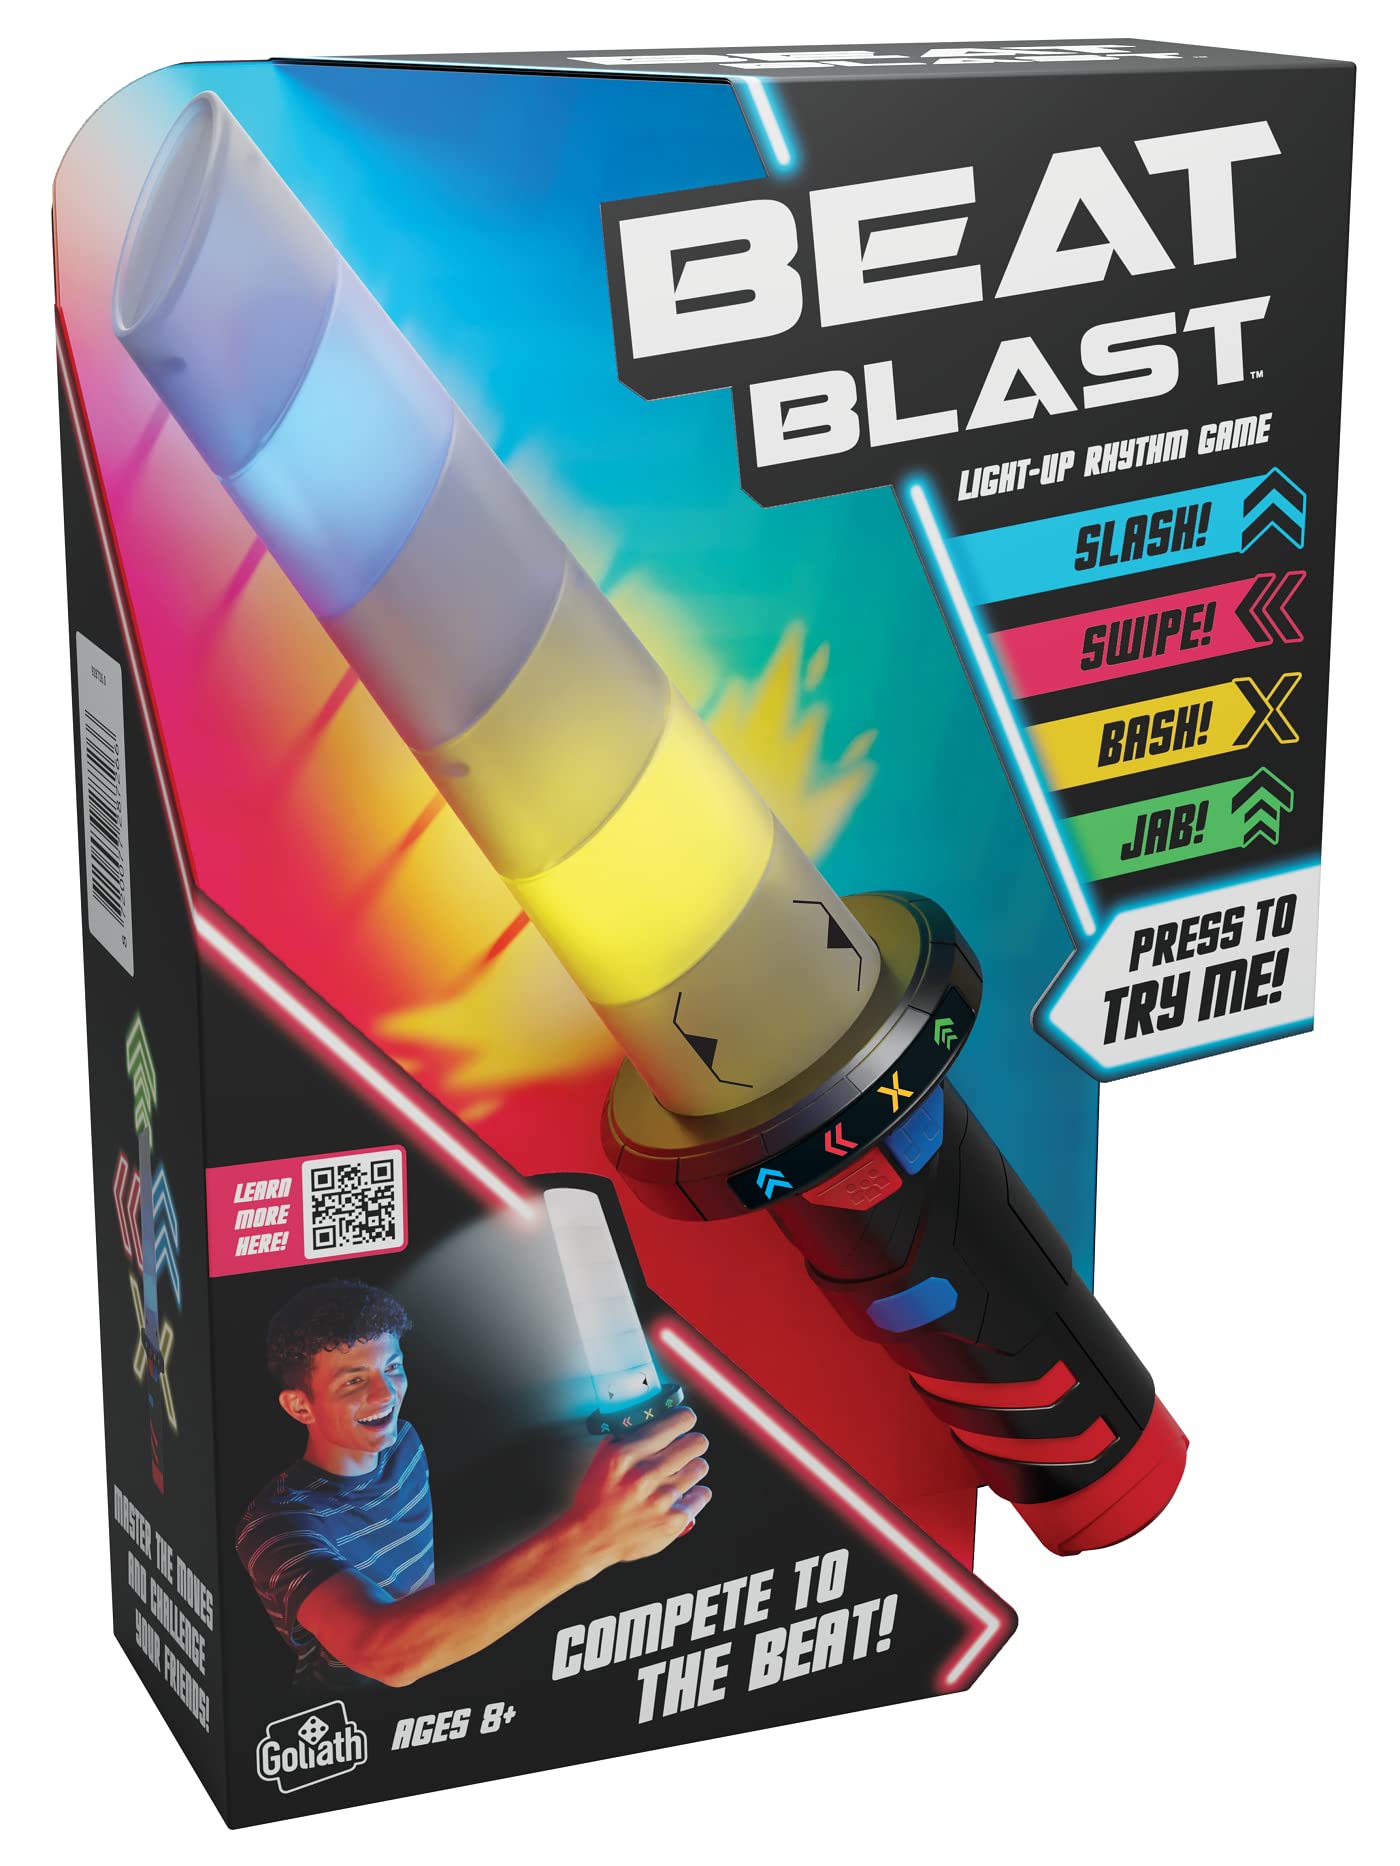 Goliath Beat Blast Game - Swing The Beat Stick on The Rhythm of The Music to Score Points - Lights and Sounds Game for Ages 8 and Up, 1 Player